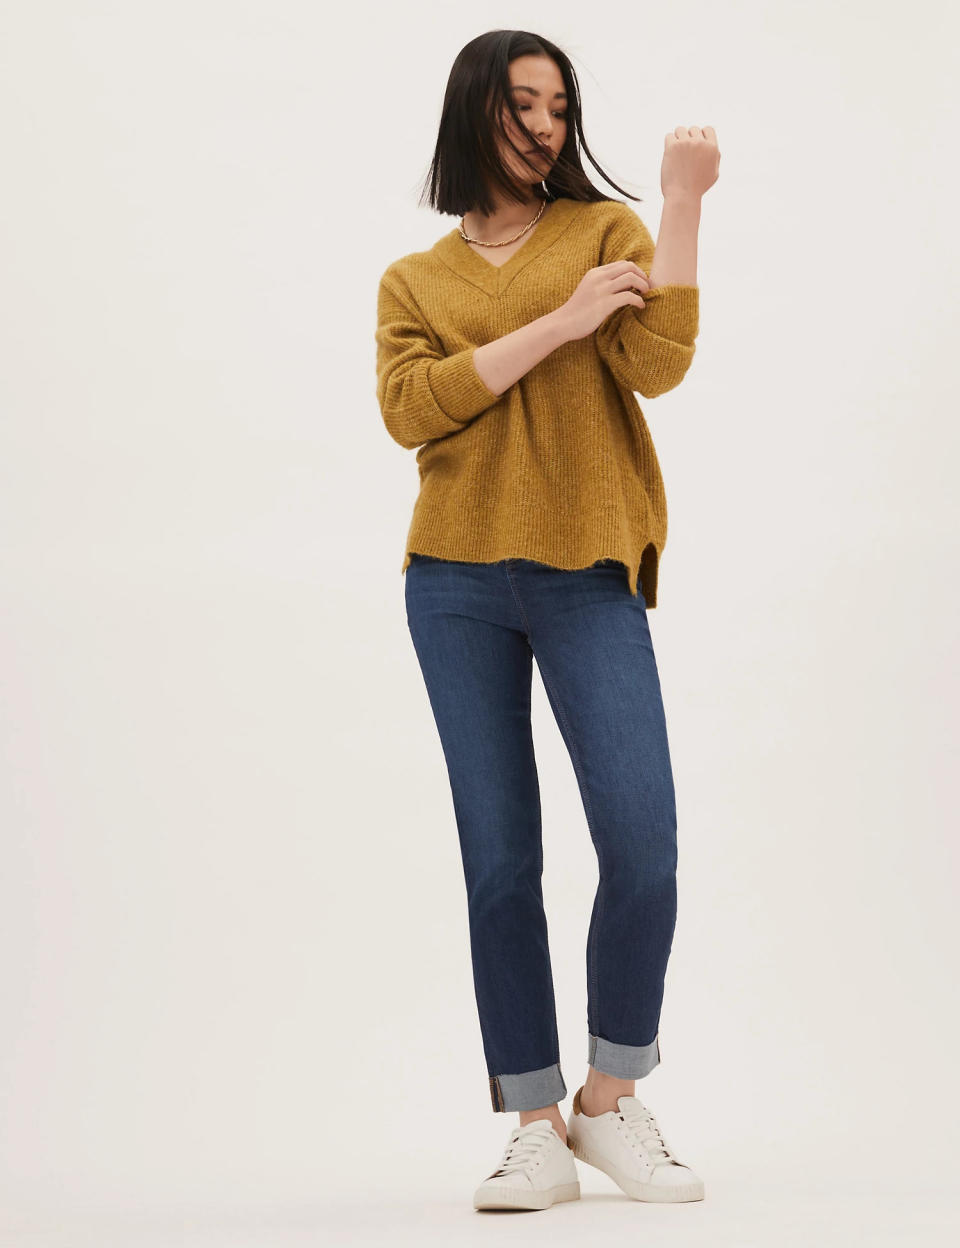 Stylish, comfortable and flattering, these jeans are a must-have